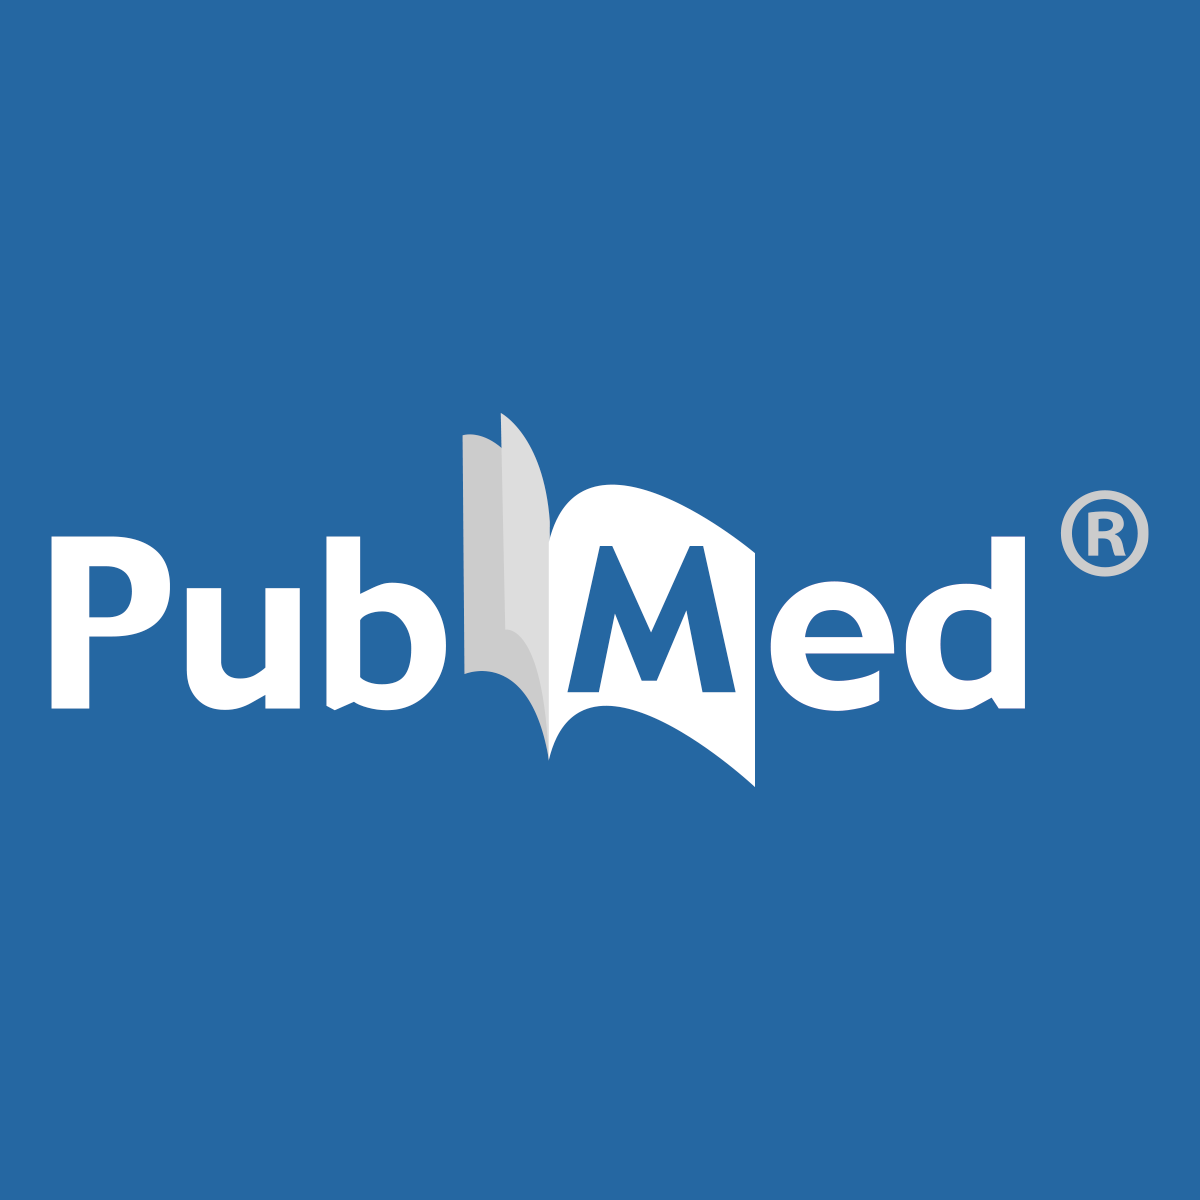 Prognostic value of cross-lineage expression of the myeloid-associated antigens CD13 and CD33 in adult B-lymphoblastic leukemia: A large real-world study of 1005 patients - PubMed